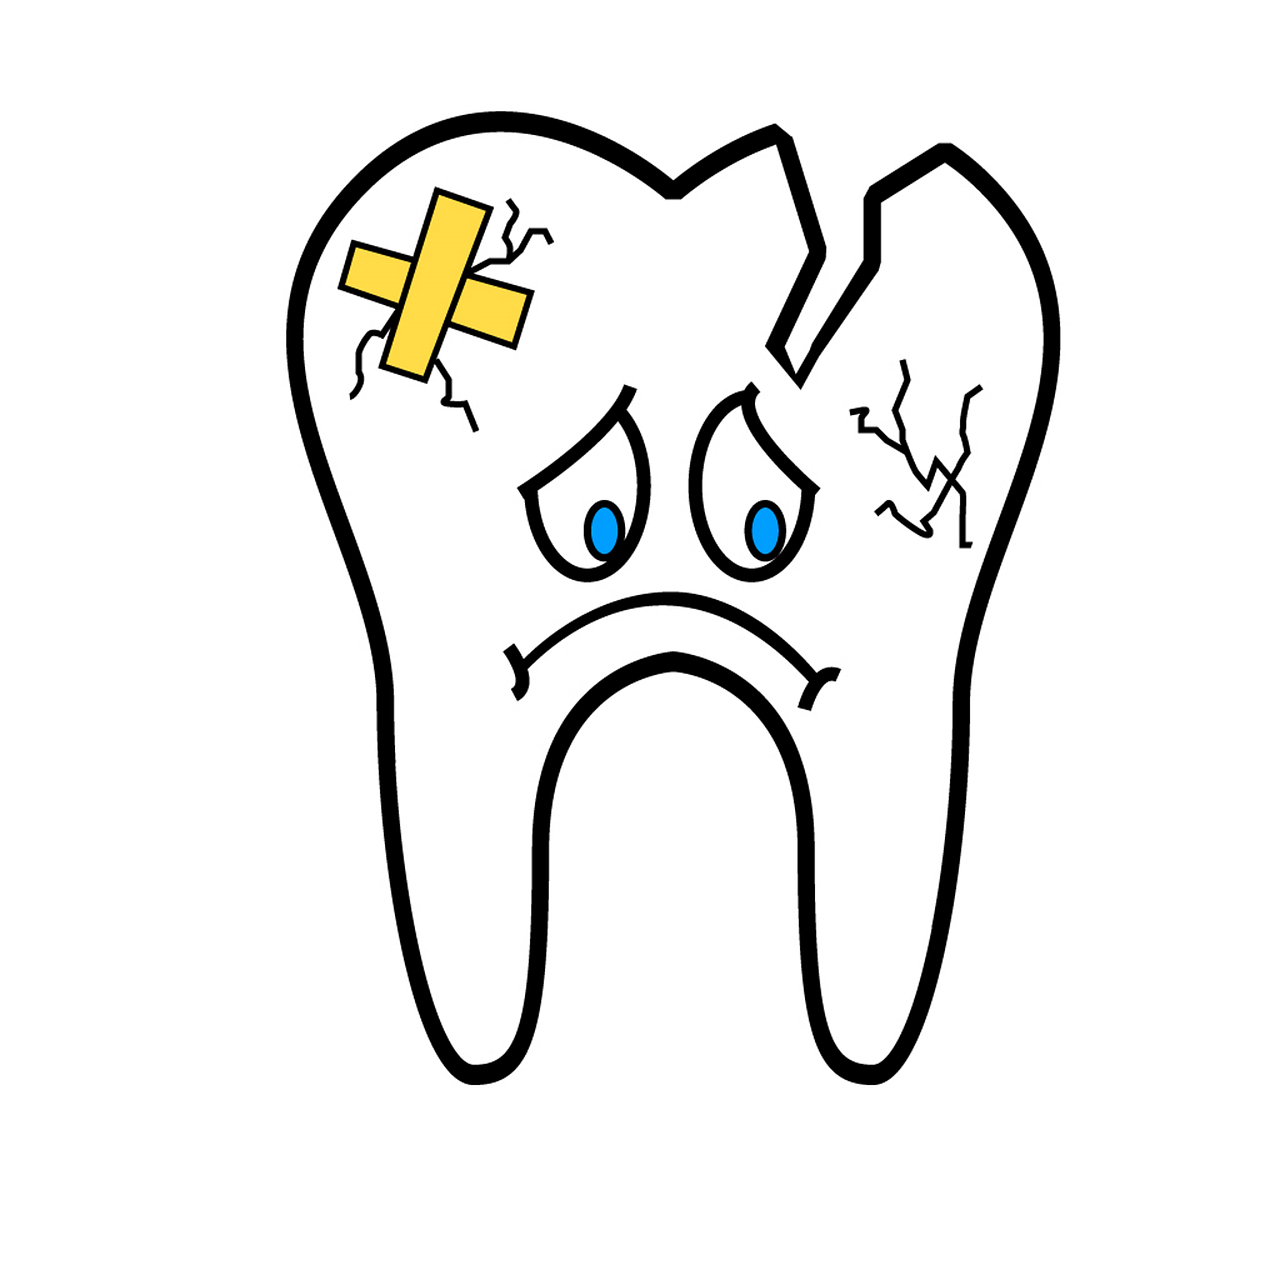 A drawing of a tooth looking sad and cracked with a plaster on the top corner.